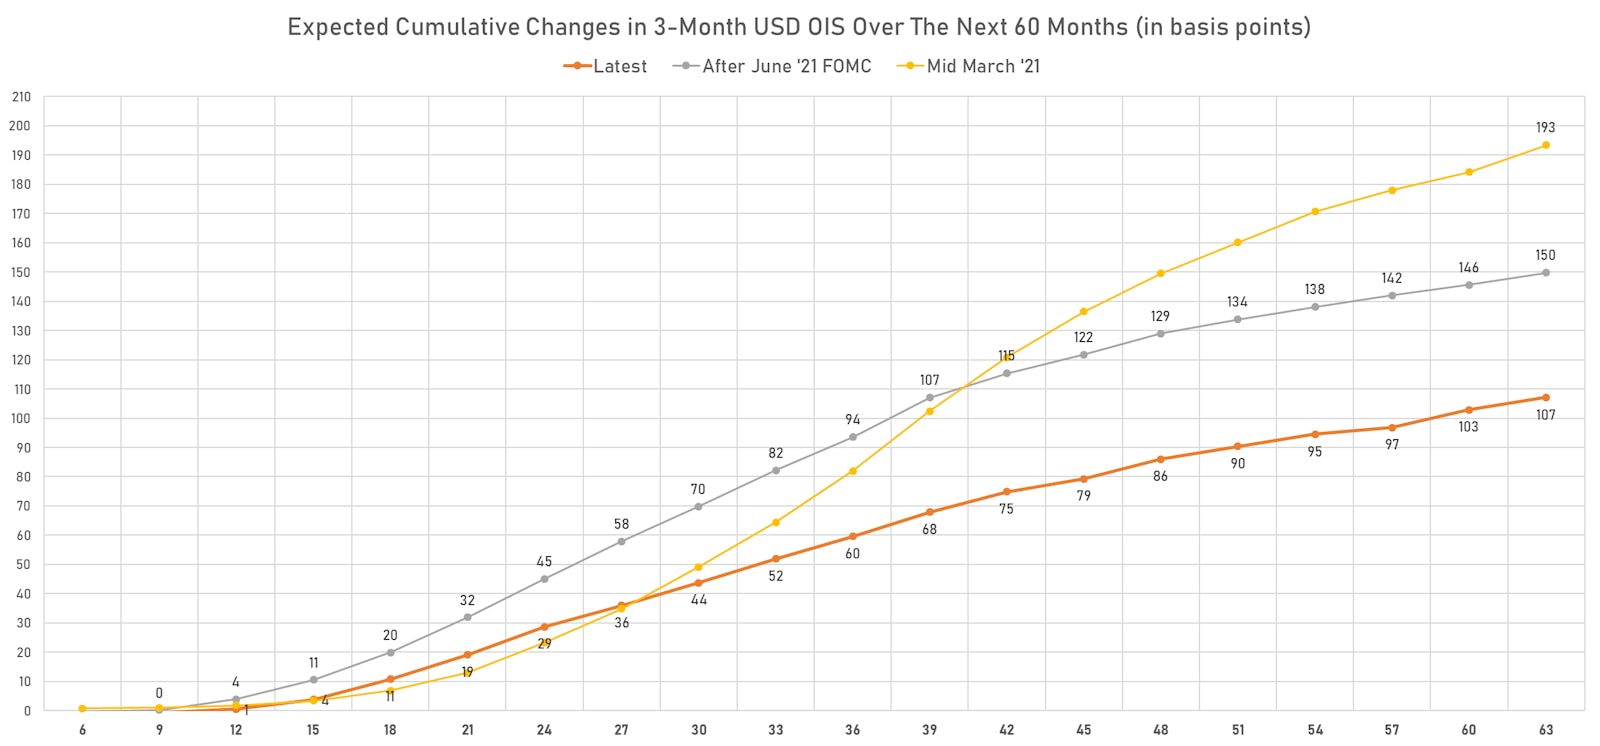 Expected Hikes Derived From 3-Month USD OIS Forward Curve | Sources: ϕpost, Refinitiv data